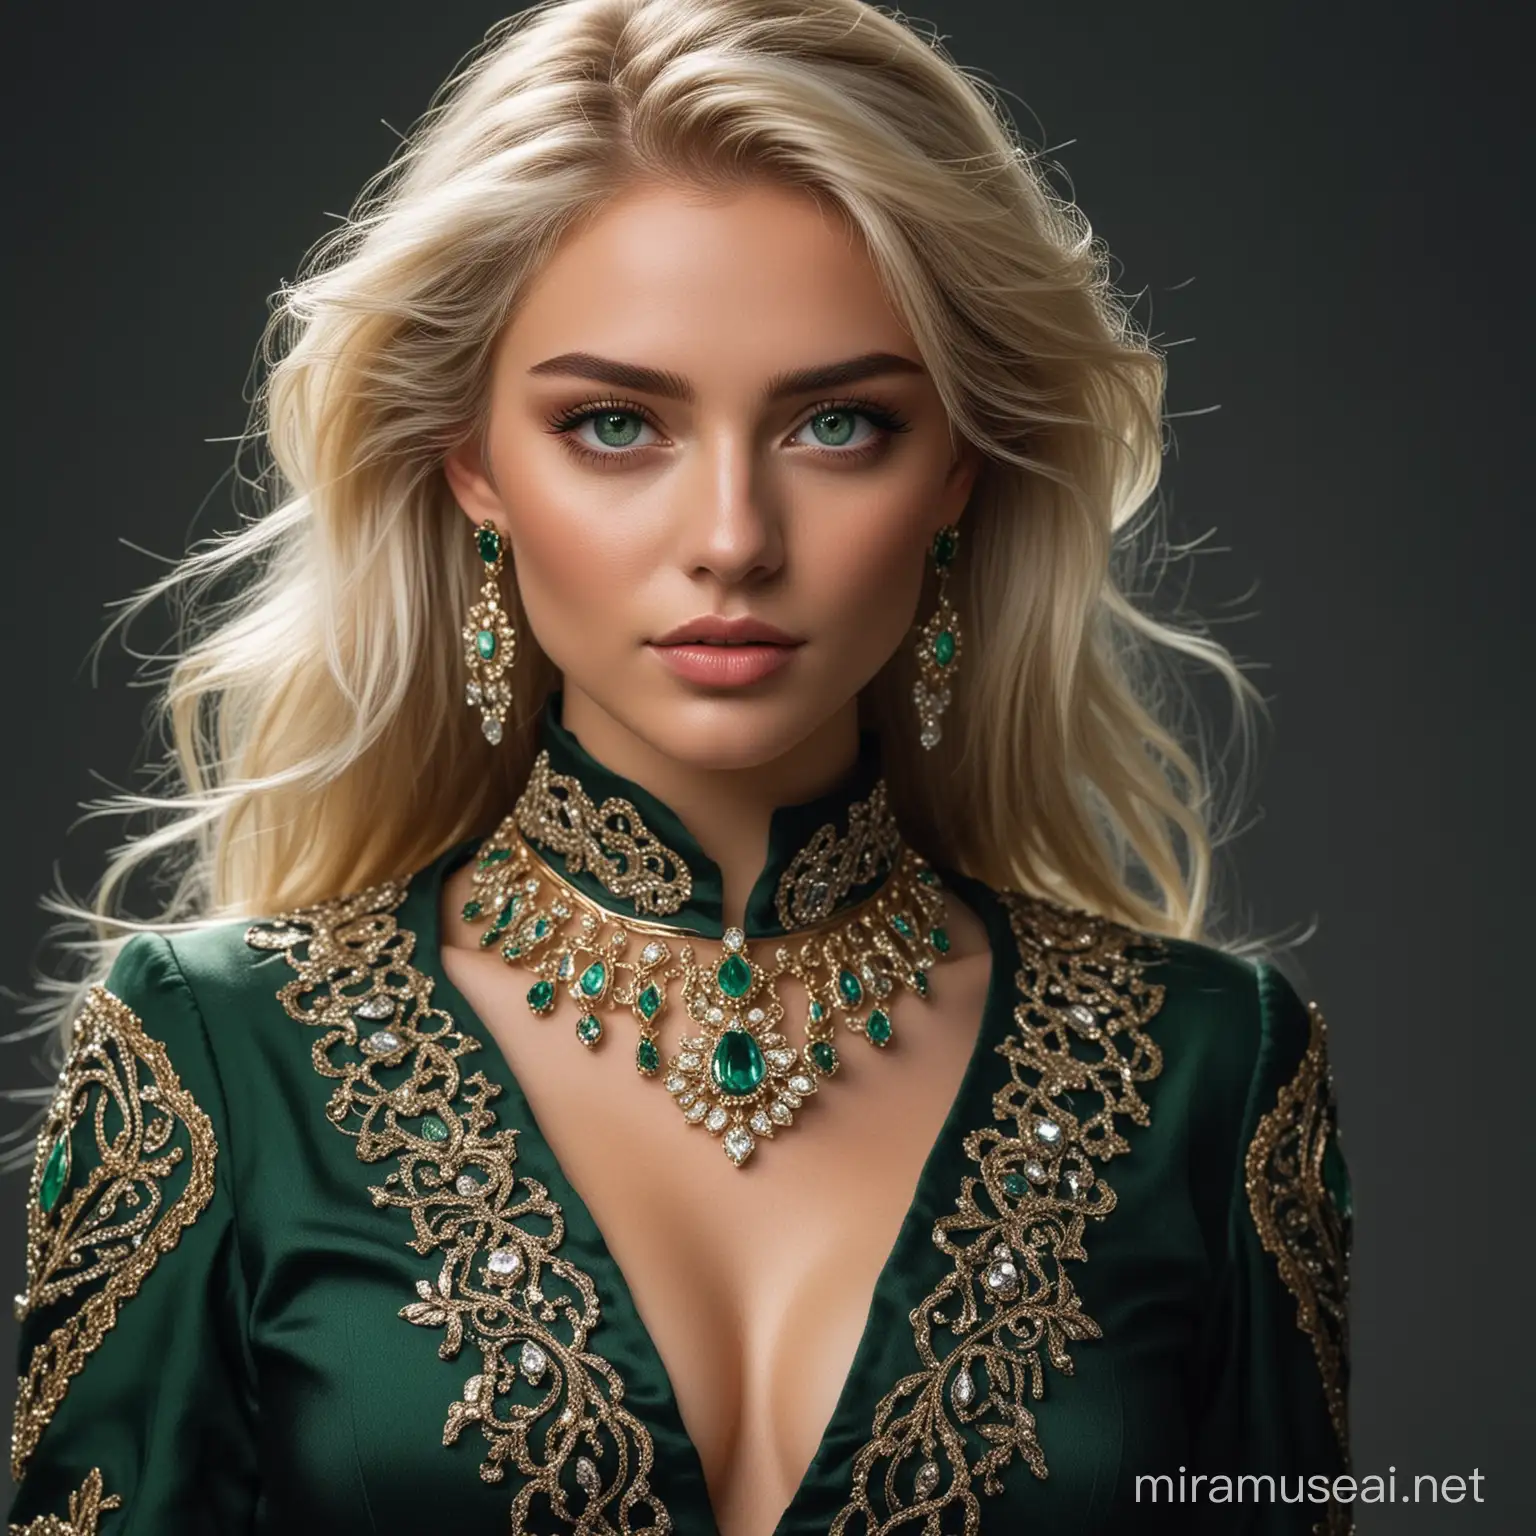 Blonde Mage in Chic Jewelry with Emerald Eyes on Dark Gray Background